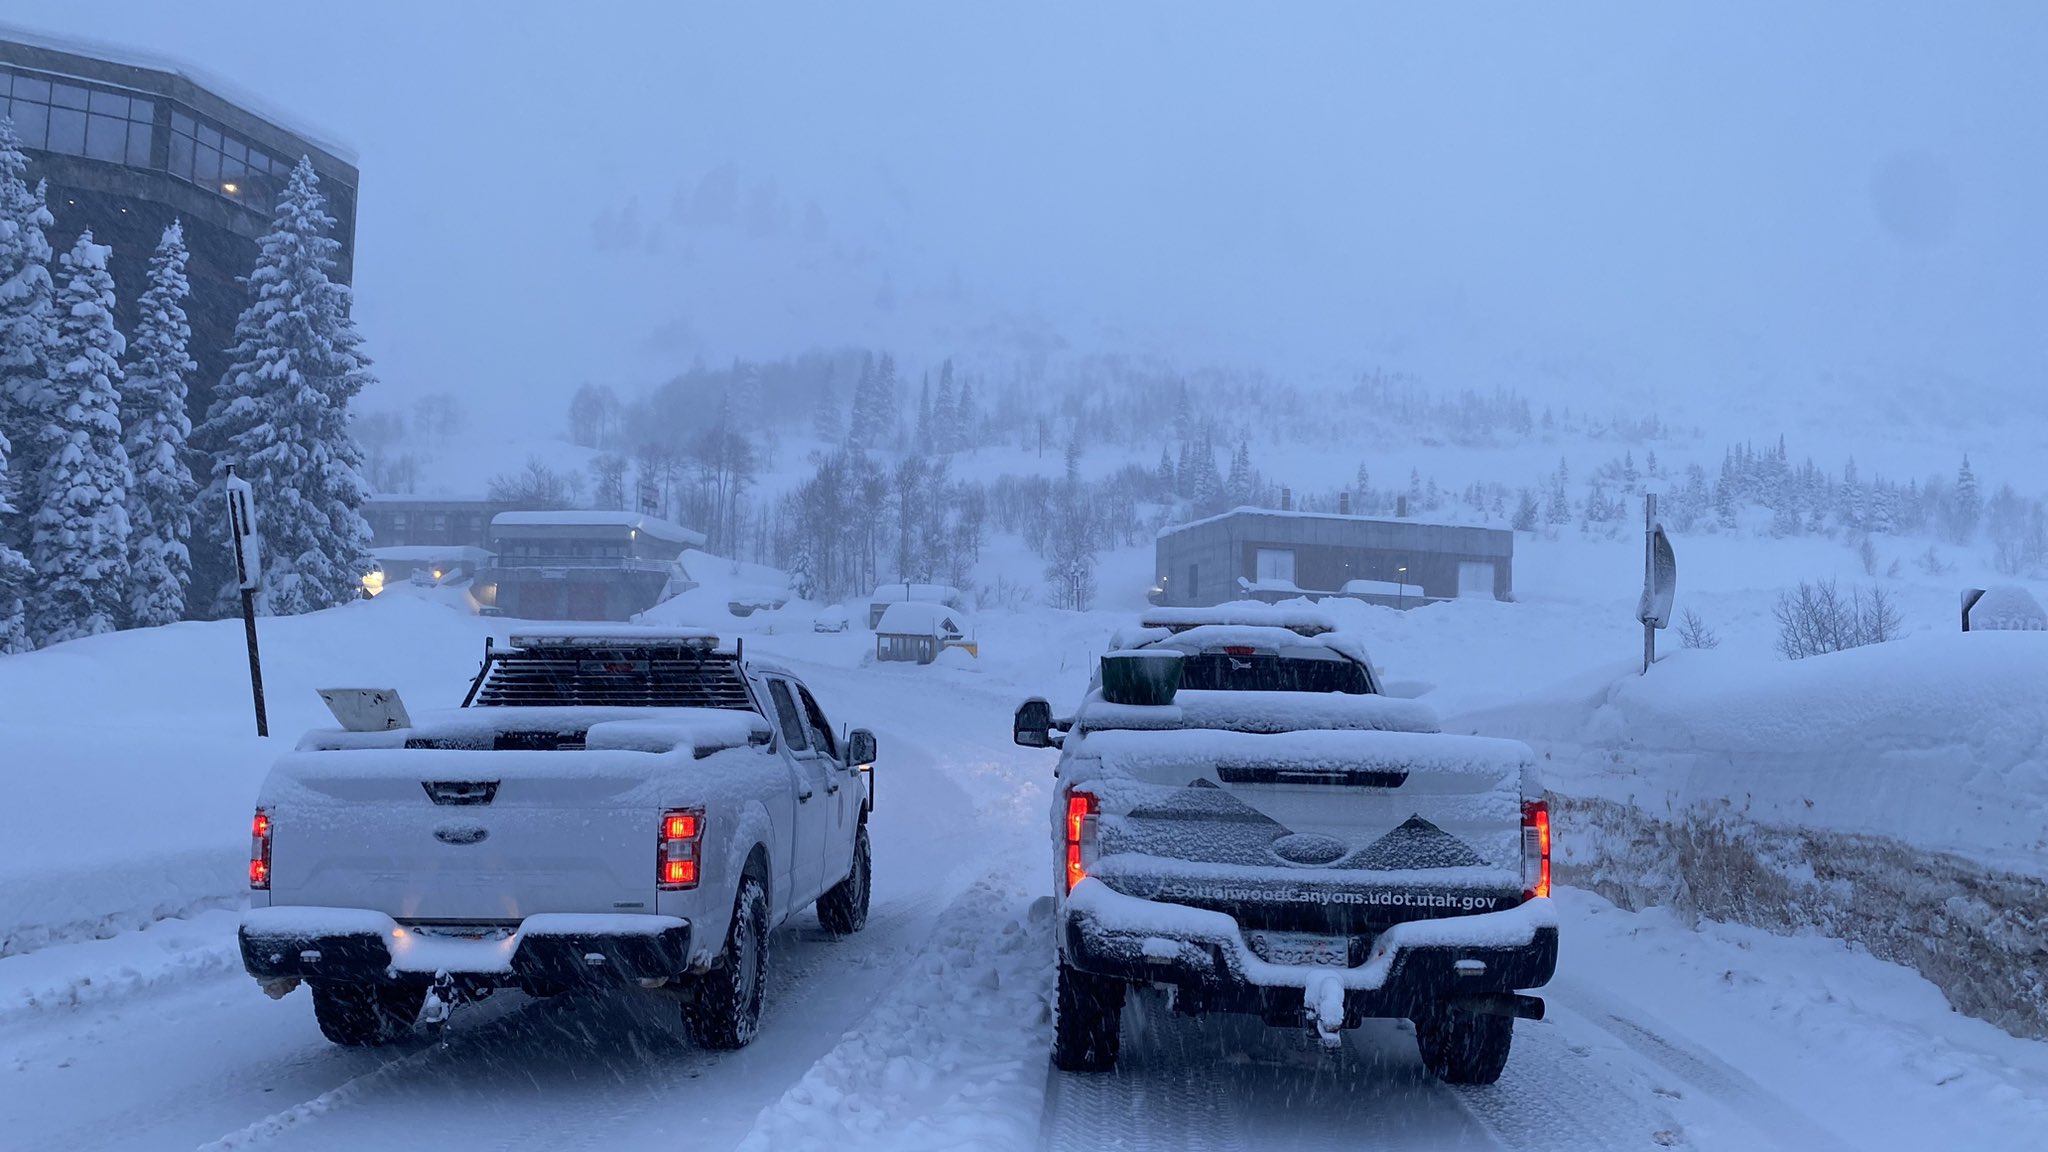 New snow was falling again across Utah on Sunday morning, closing canyons for avalanche mitigation...